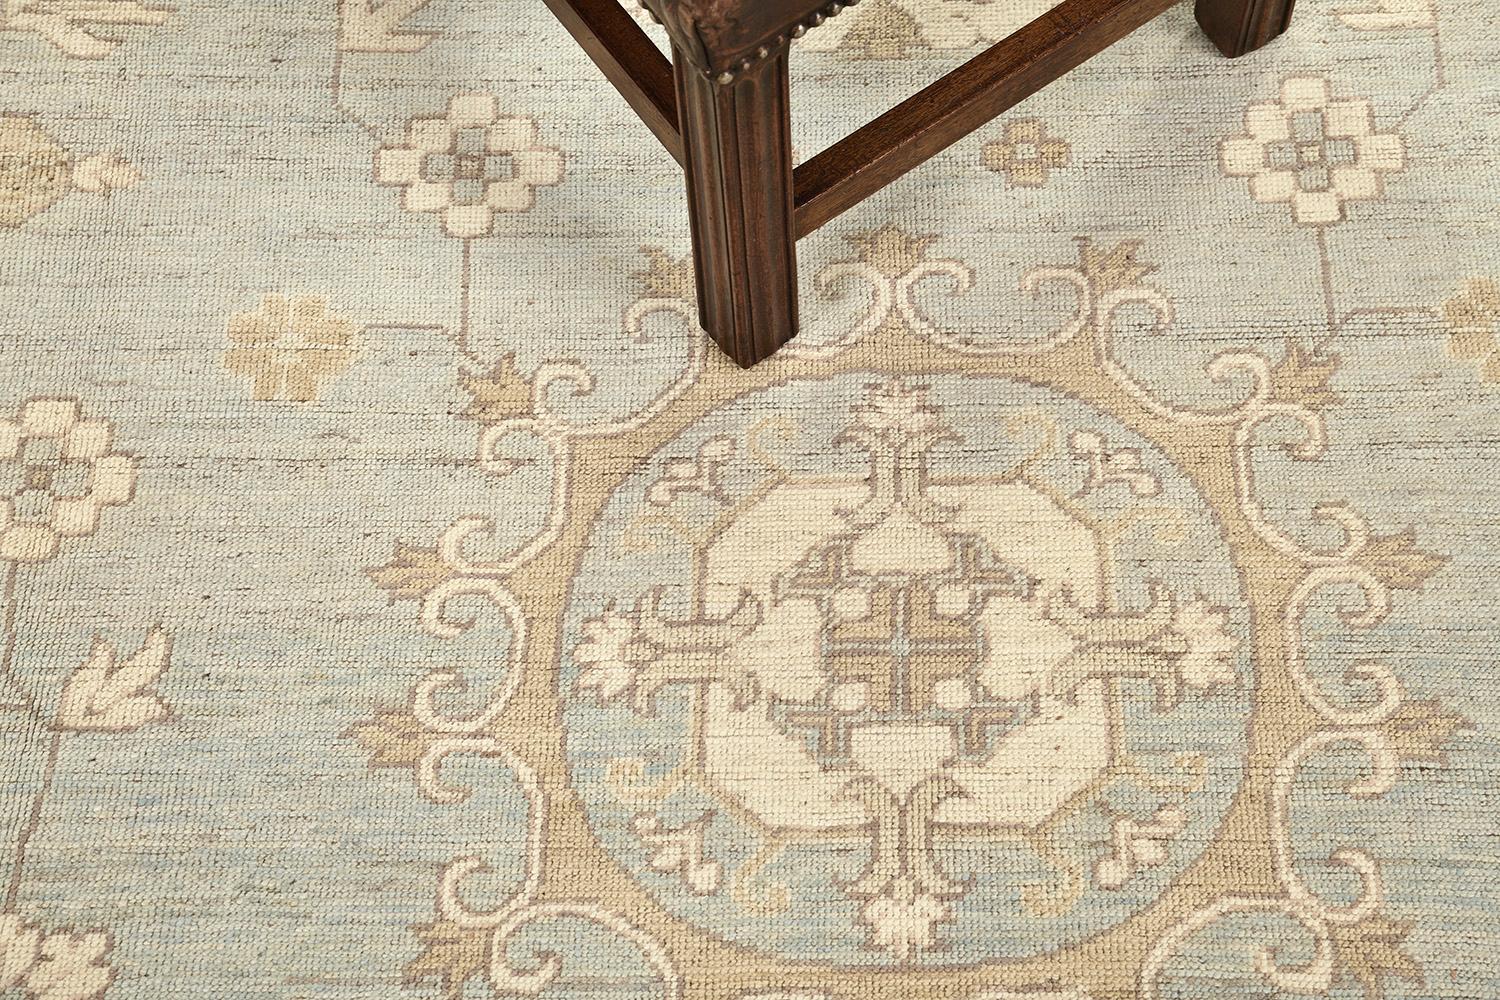 A meticulous revival of a Khotan Design rug, ideally suited for a floor wall piece. Three grandiose medallions and symmetric motifs in camel tone outlines are aligned that have spaces in a muted blue field. From borders to the field, it compliments